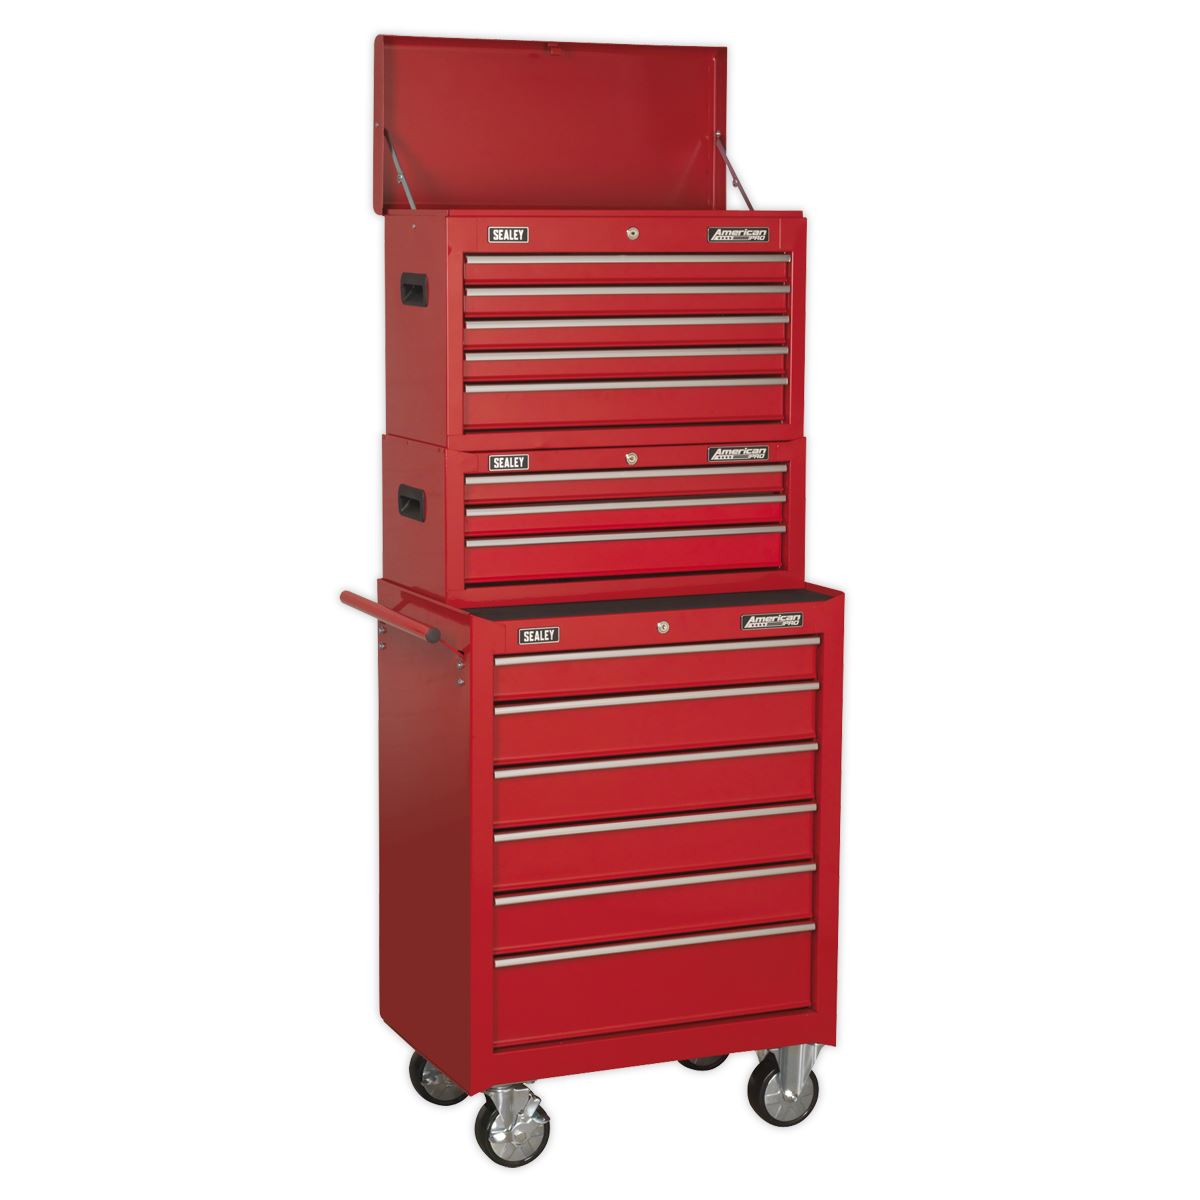 Sealey American Pro Topchest, Mid-Box Tool Chest & Rollcab 14 Drawer Stack - Red